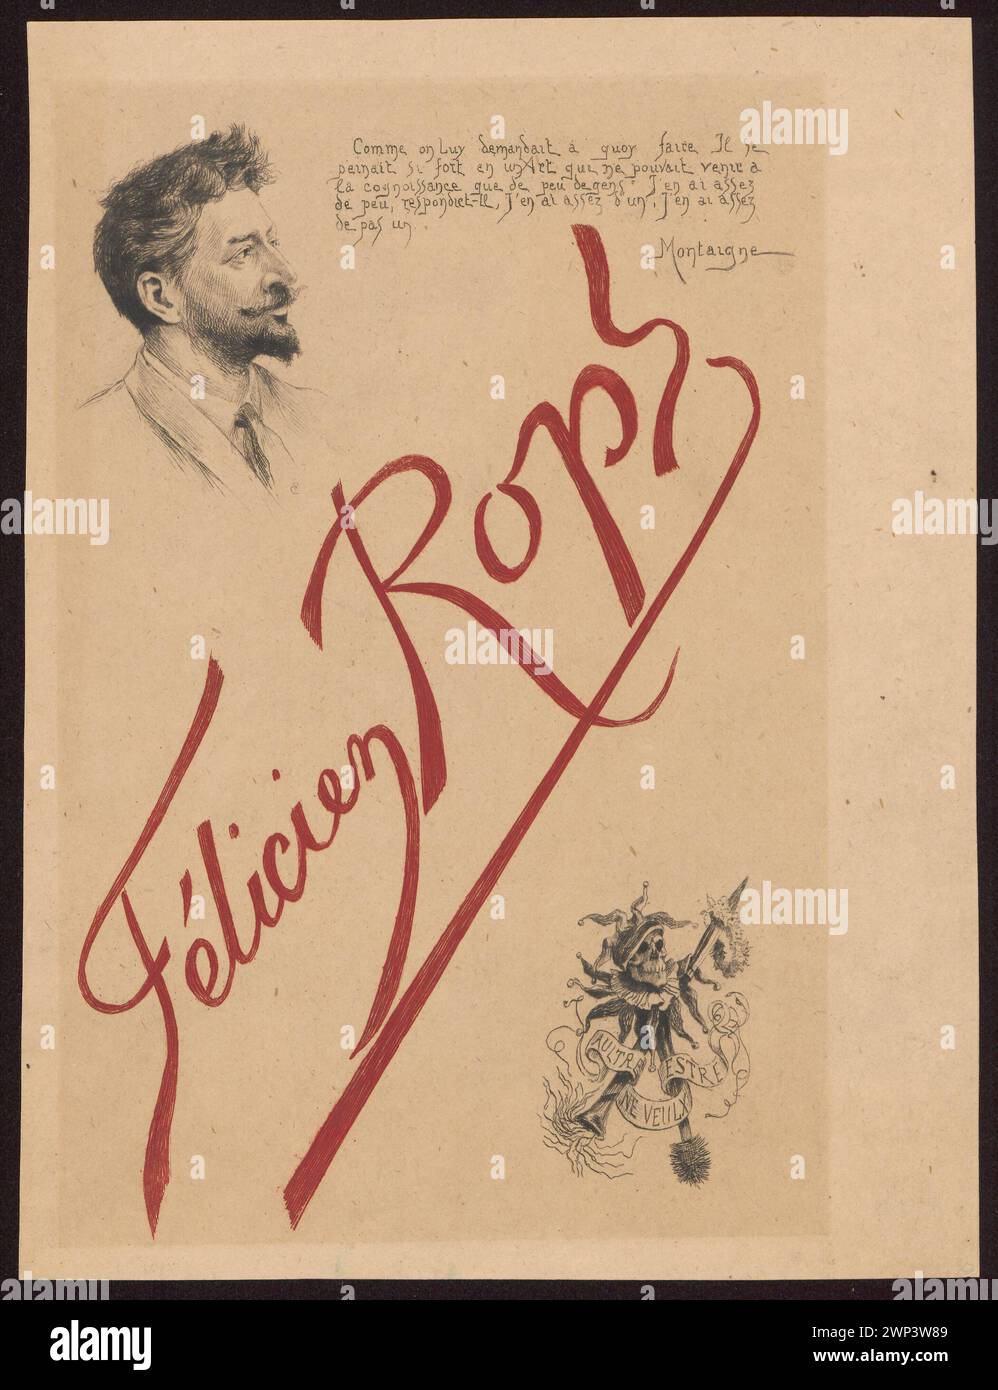 Felicien ROPS; Title card for graphic portrait with a portrait of the author and a quote from Montaigne; ROPS, Félicien (1833-1898); 1898 (1848-00-00-1898-00-00);France, ROPS, Felicien (1833-1898) - iconography, Schlesische Zeitung (magazine - 1741-1944 - Wrocław), self -portraits, jester, character, skulls, graphic designers, portraits, portraits of artists, men's portraits, Rylec, teka, Stock Photo